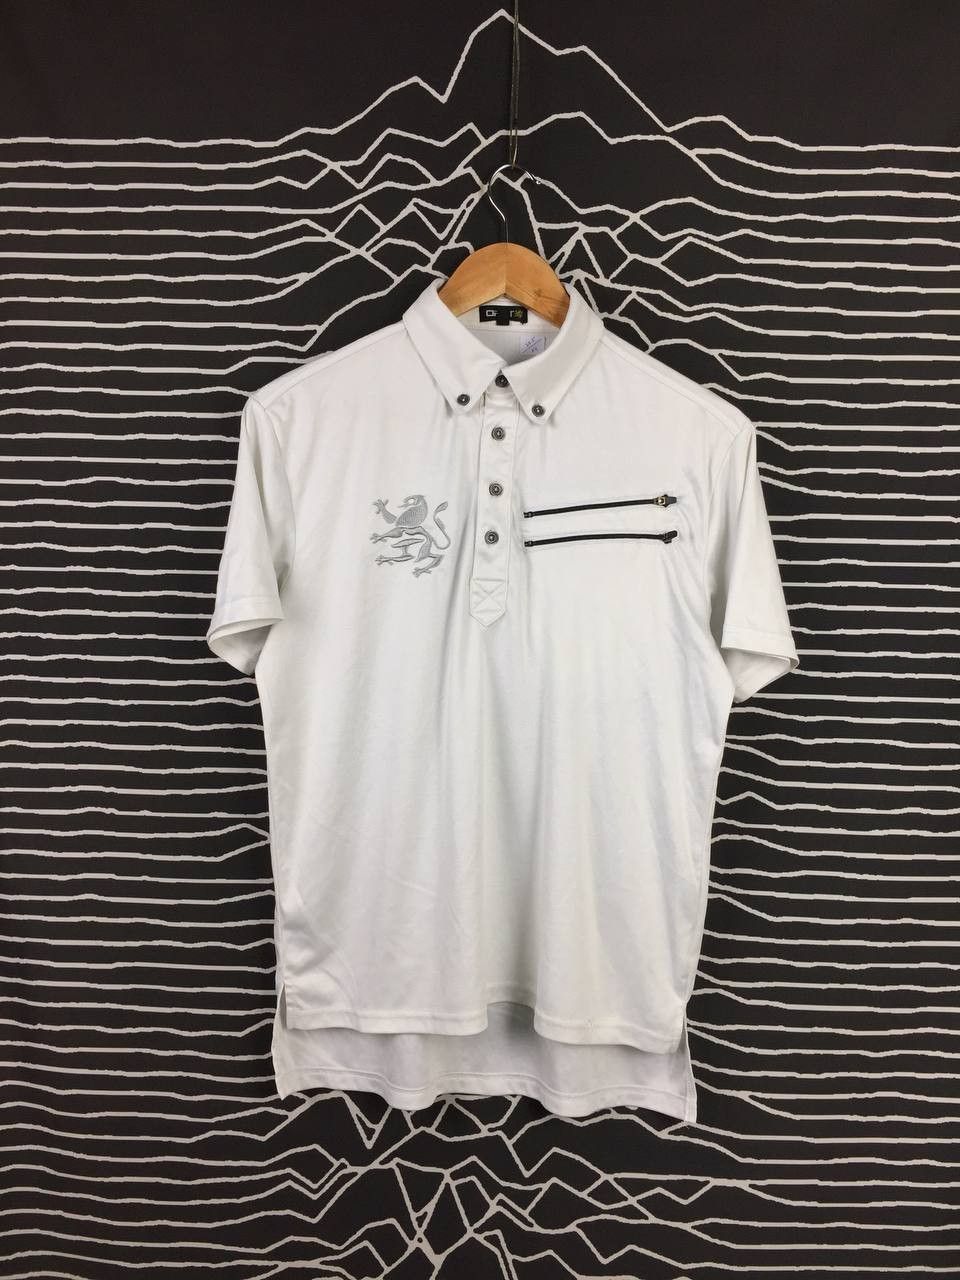 Vintage OPST Casual Golf Sportswear Polo Tee | Grailed